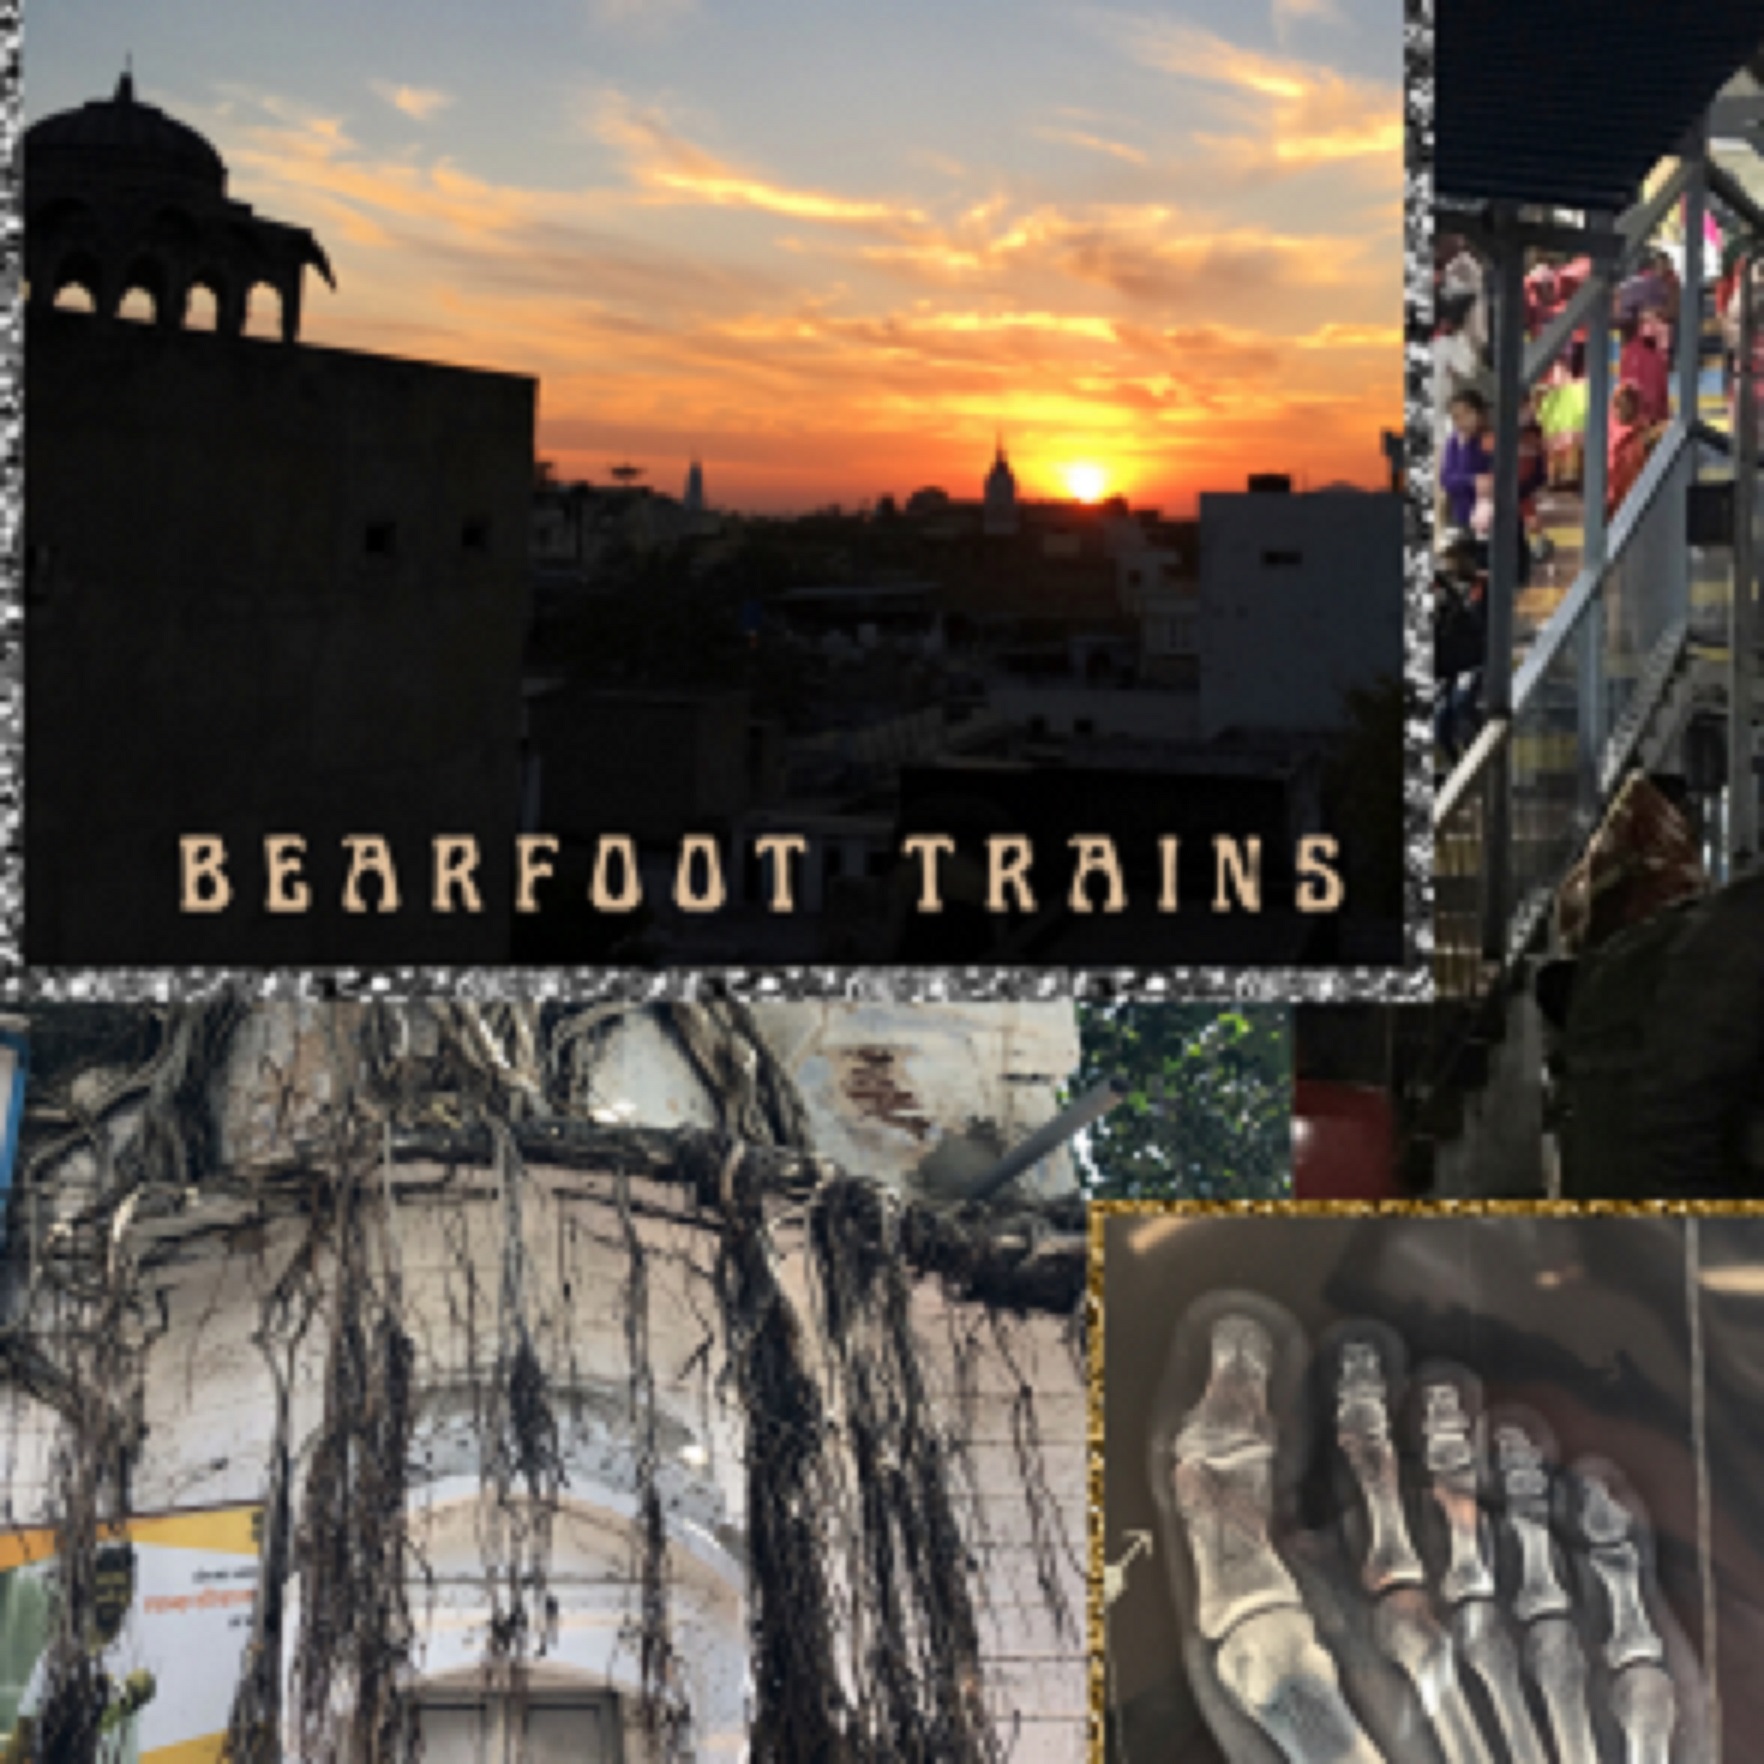 Singer-songwriter Aaron Bear's new single “Bearfoot Trains” out now